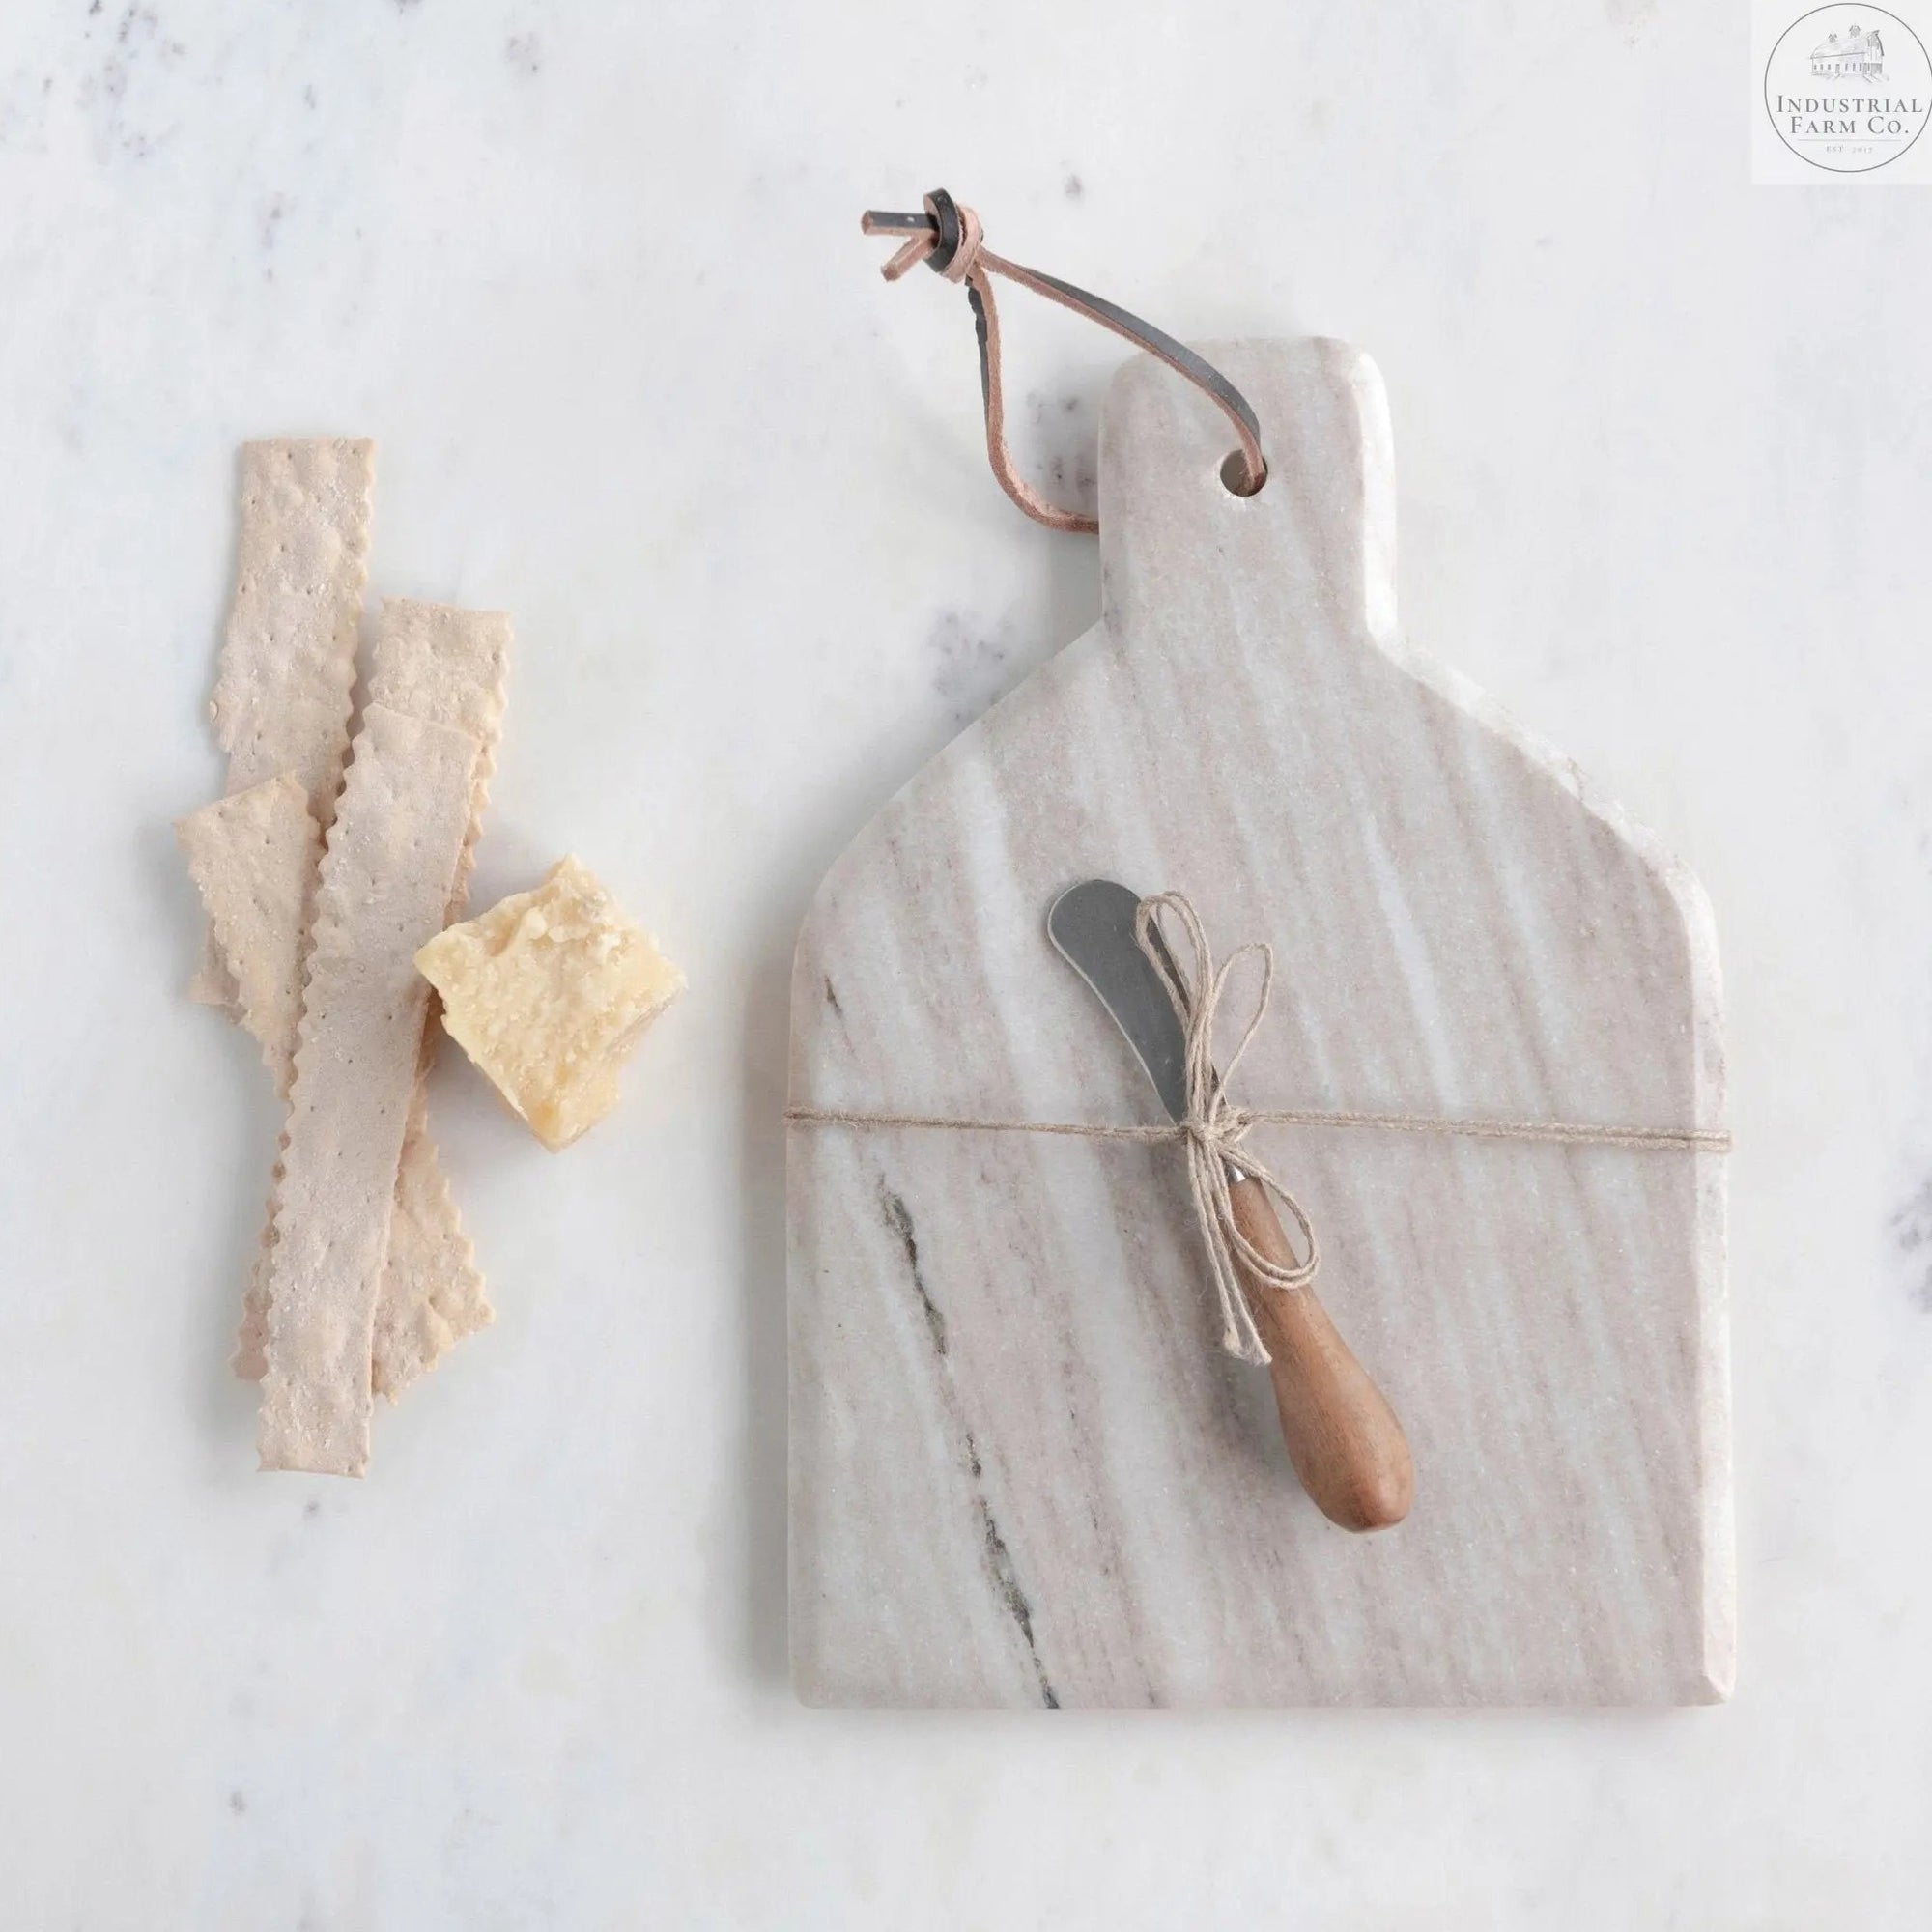 Marble Cheese Cutting Board  Default Title   | Industrial Farm Co